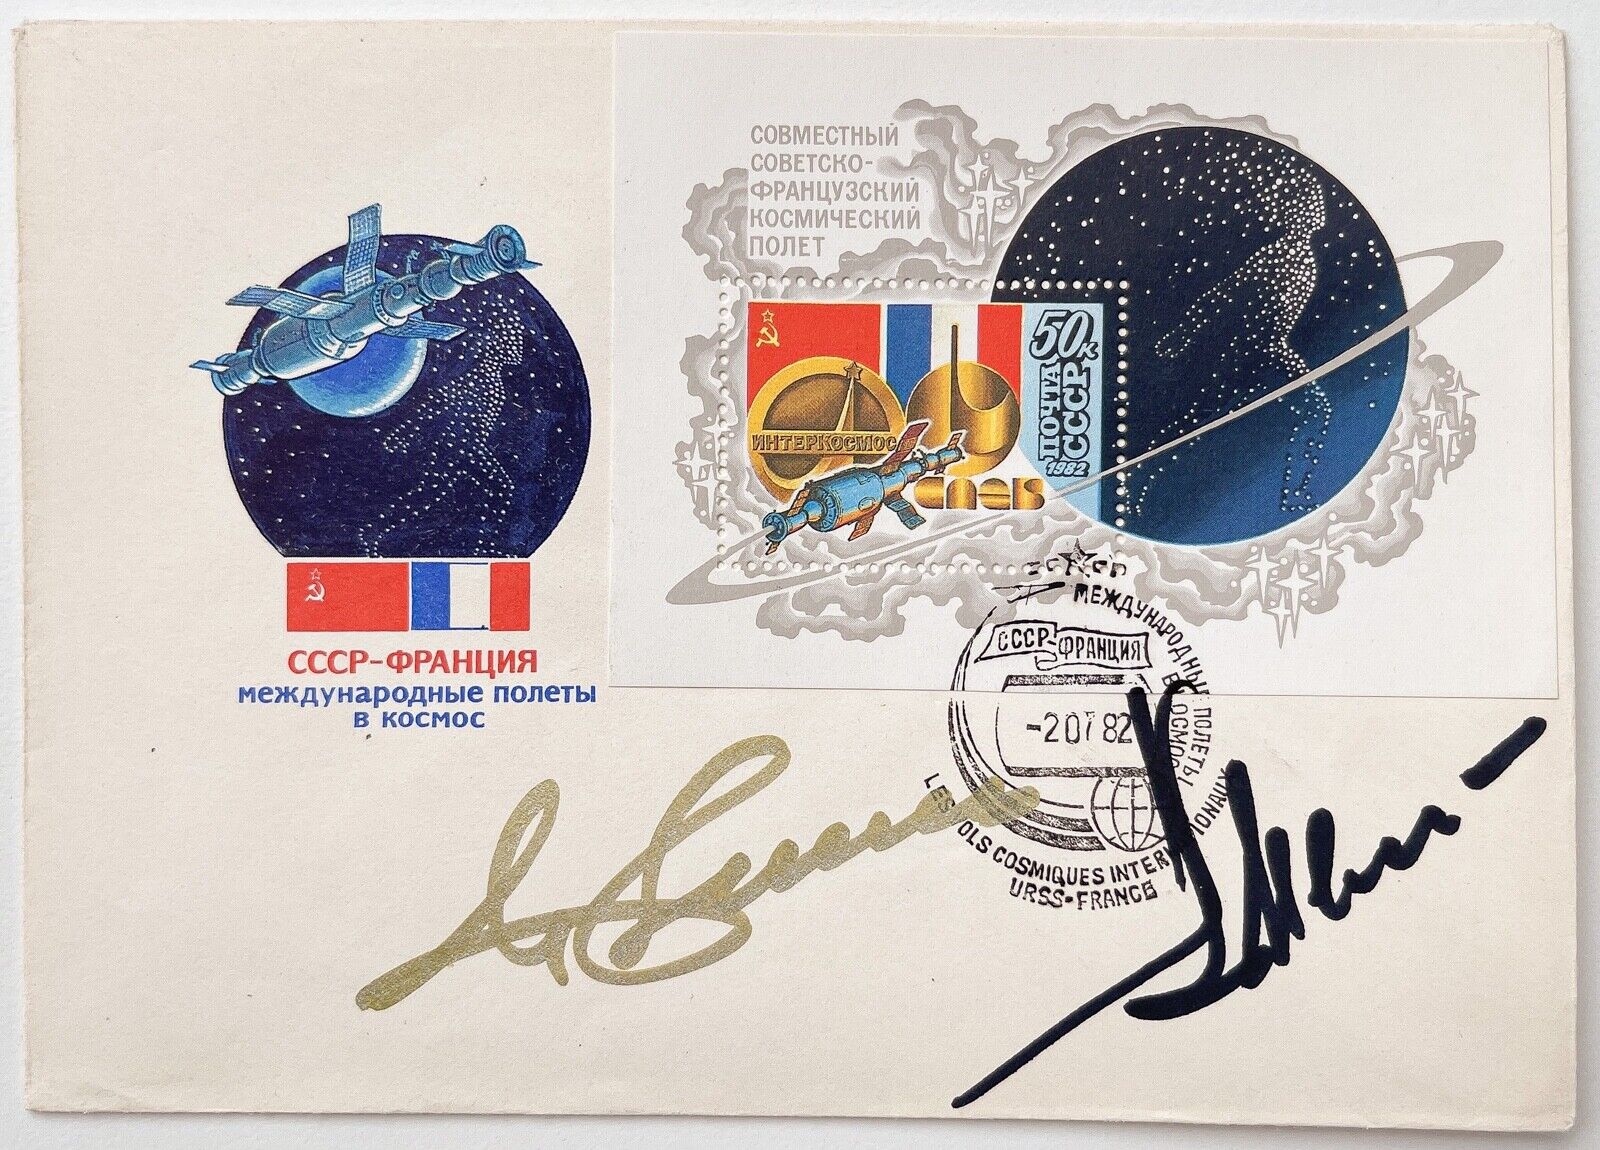 Rare Soviet Cosmonauts Autographed Envelope w/ Stamps and Spacecraft Image